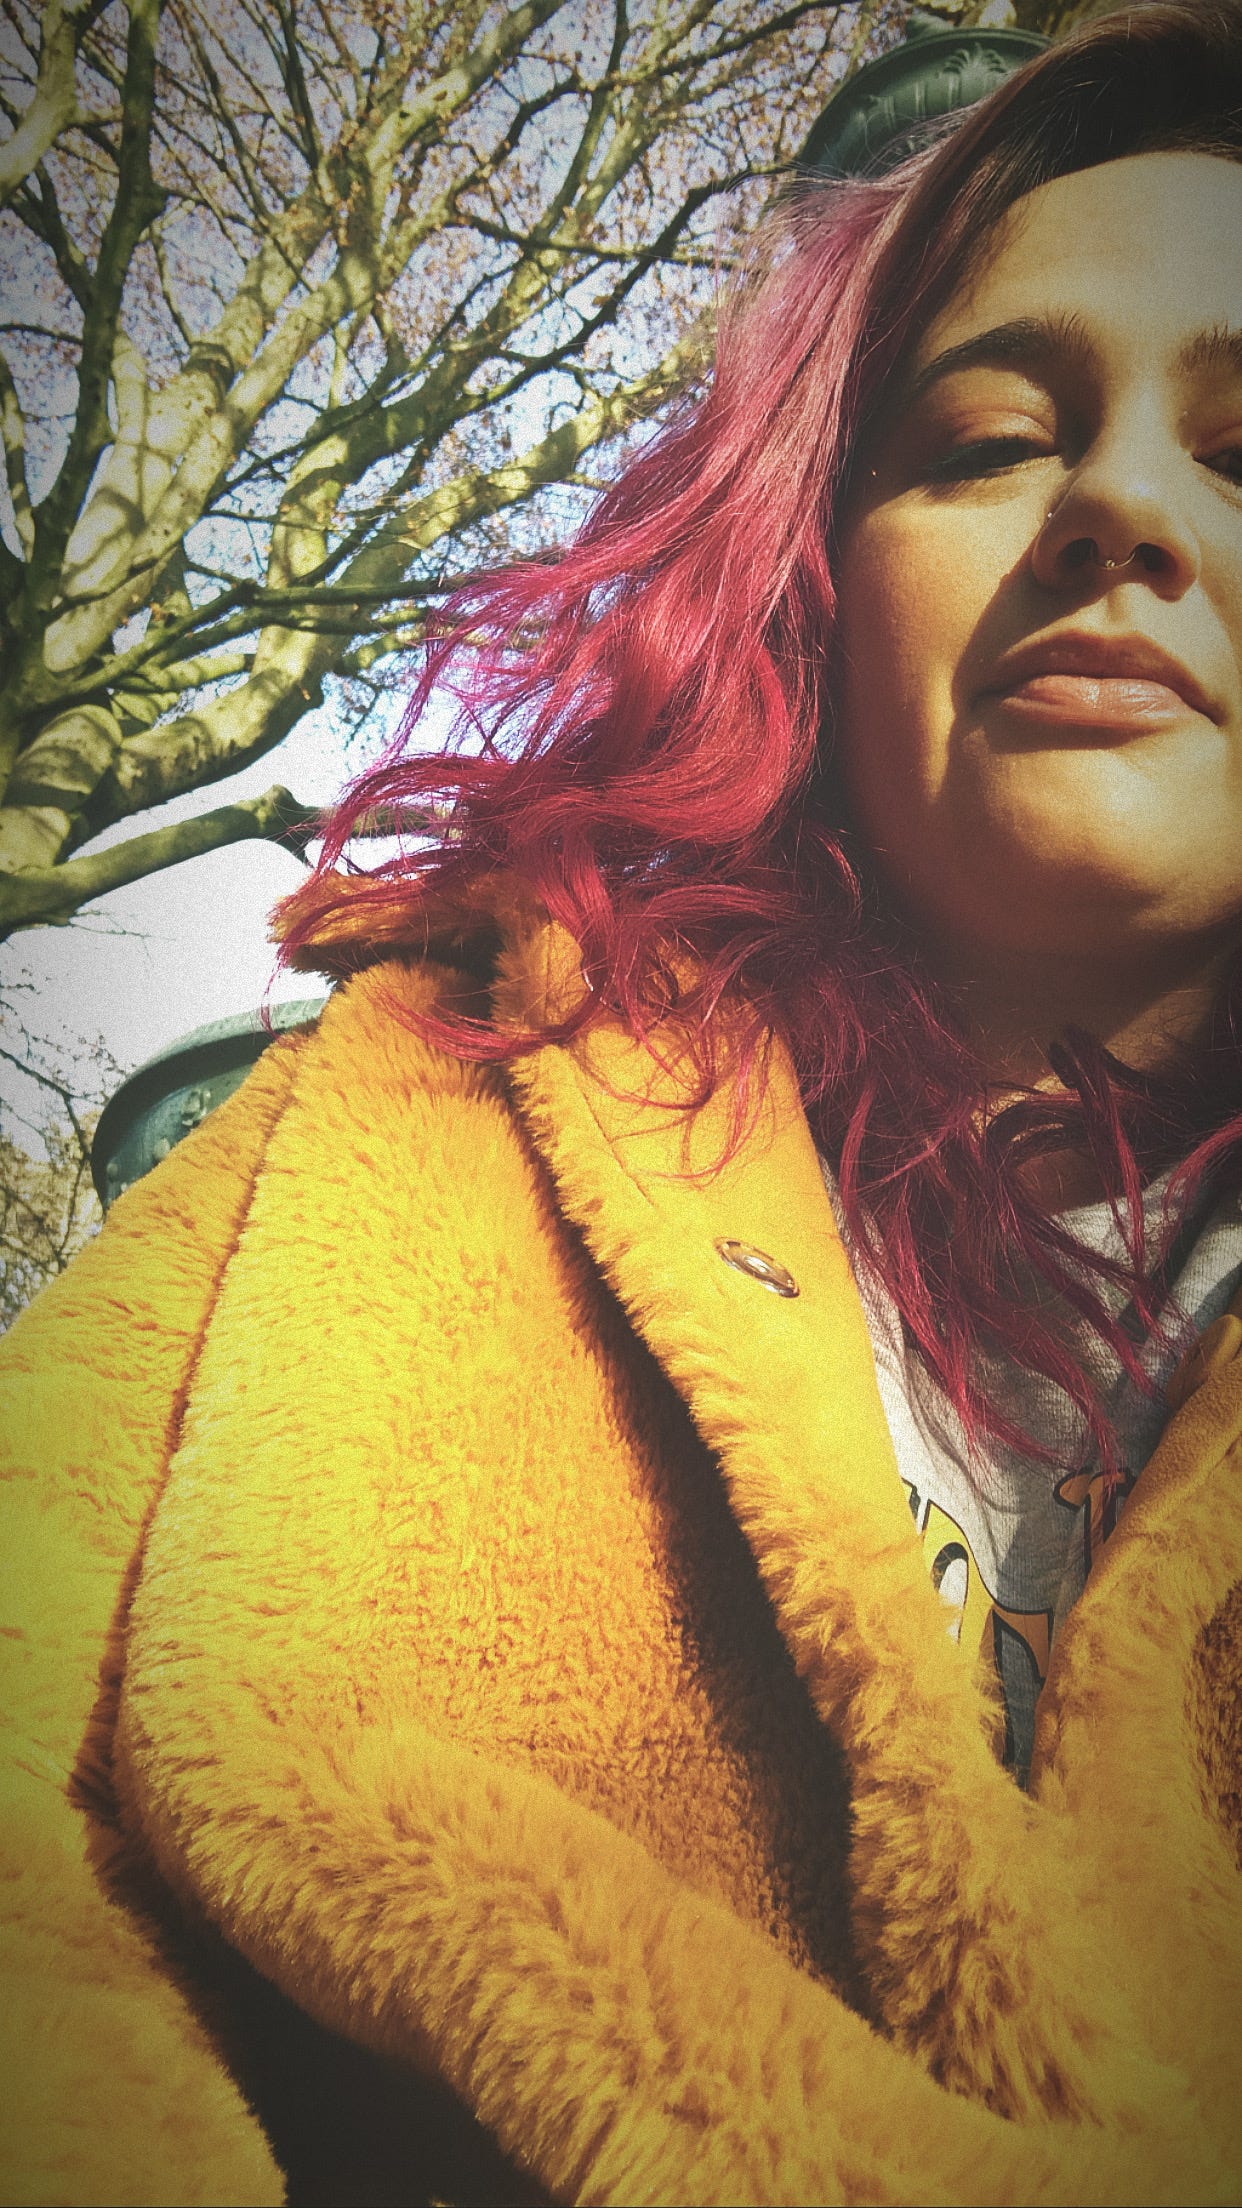 i am facing you from a somewhat higher angle, wearing a fluffy yellow coat. my hair is long and wavy and bright magenta. there is a mostly bare tree behind my right shoulder, in the left quarter of the image. i am giving you a soft smile.